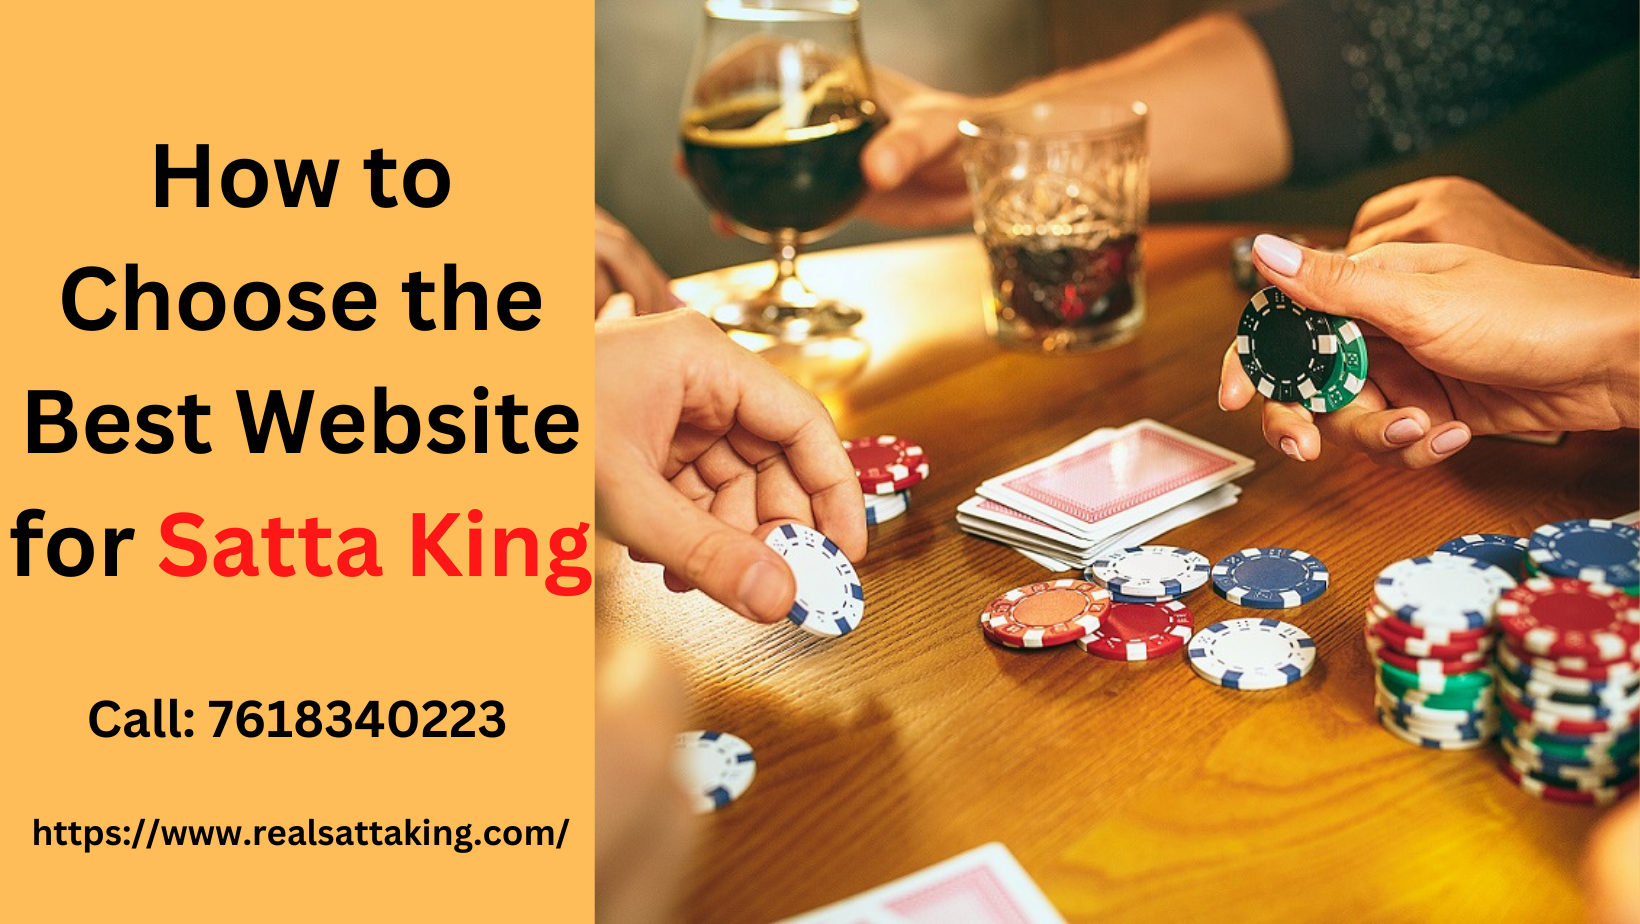 How to Choose the Best Website for Satta King